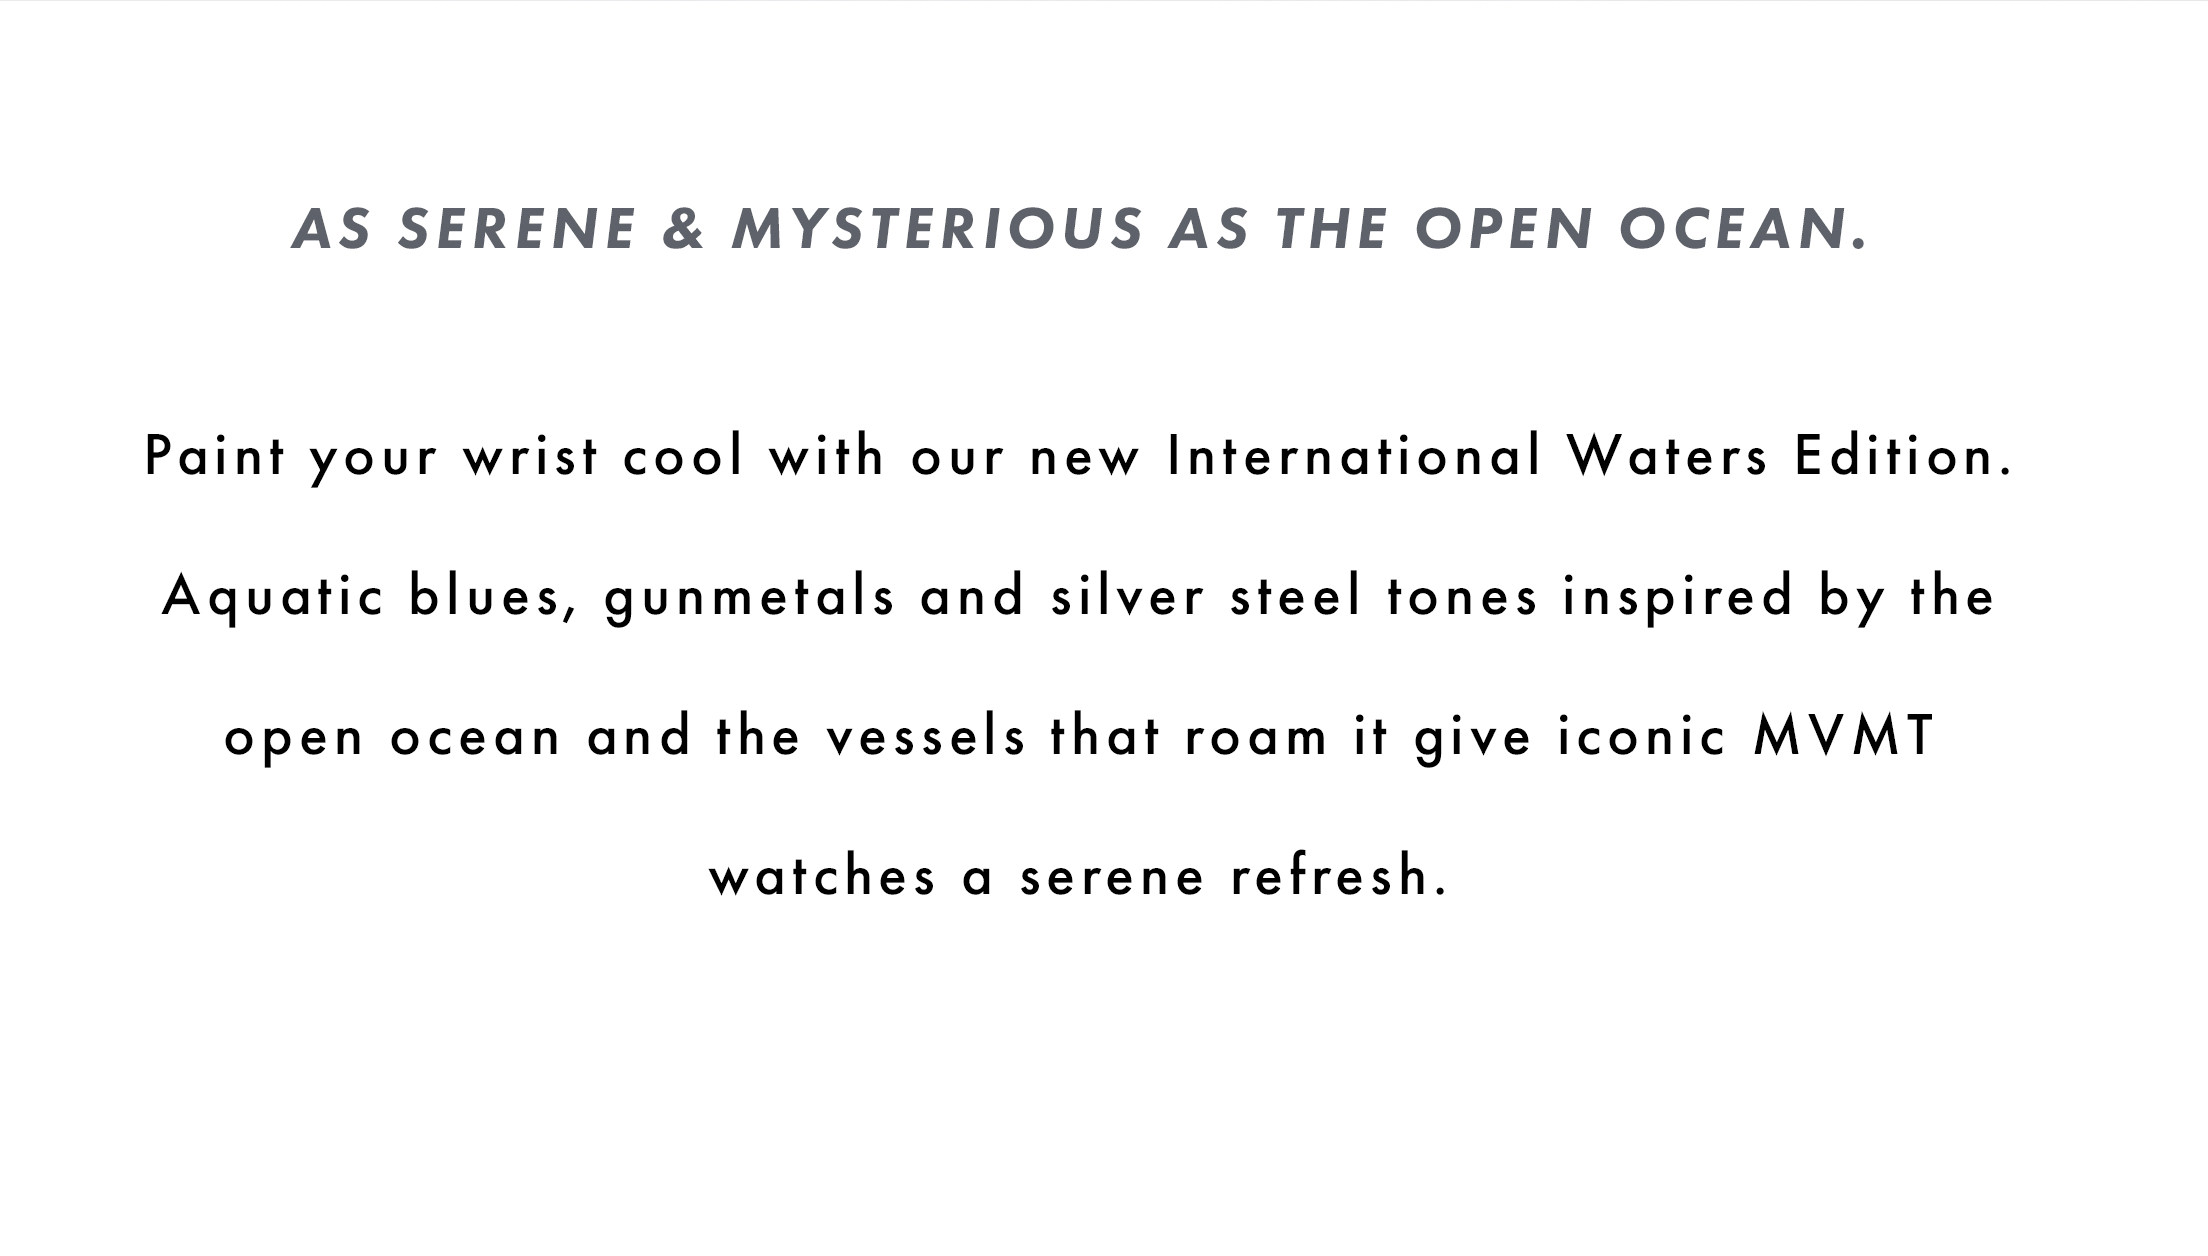 As serene & mysterious as the open ocean. Paint your wrist cool with our new International Waters Edition. Aquatic blues, gunmetals, and silver steel tones inspired by the open ocean and the vessels that roam it give iconic MVMT watches a serene refresh.